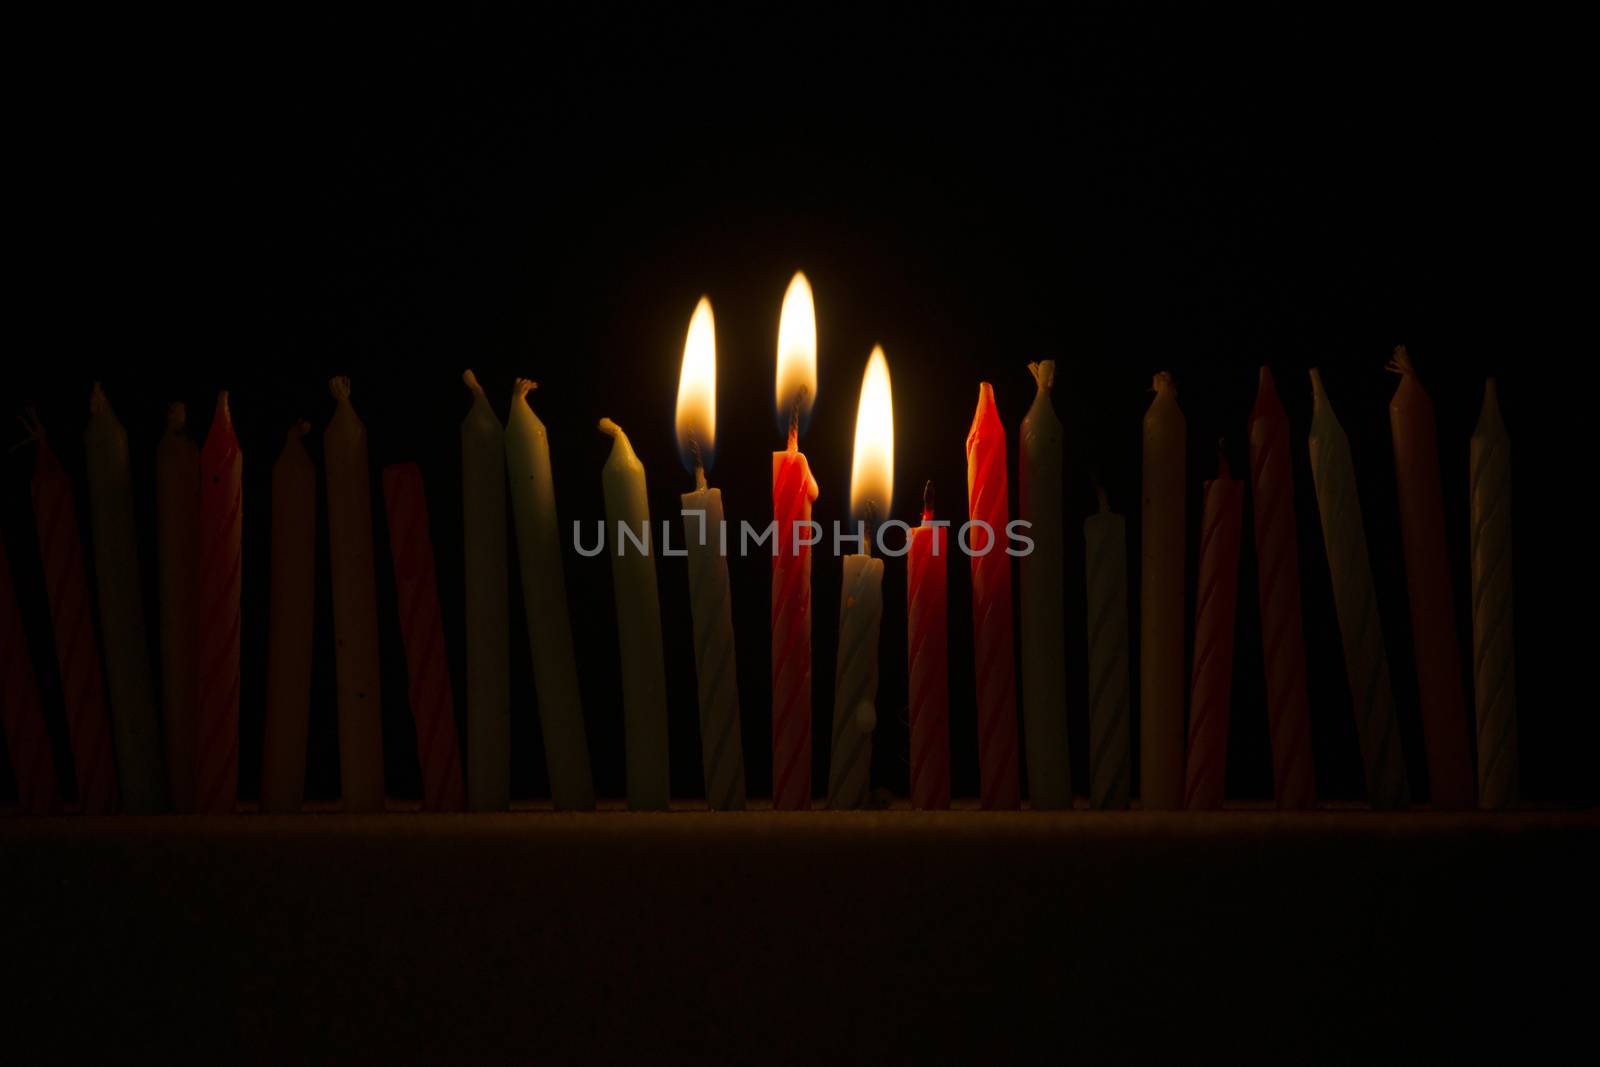 Series of small lighted candles on a black background